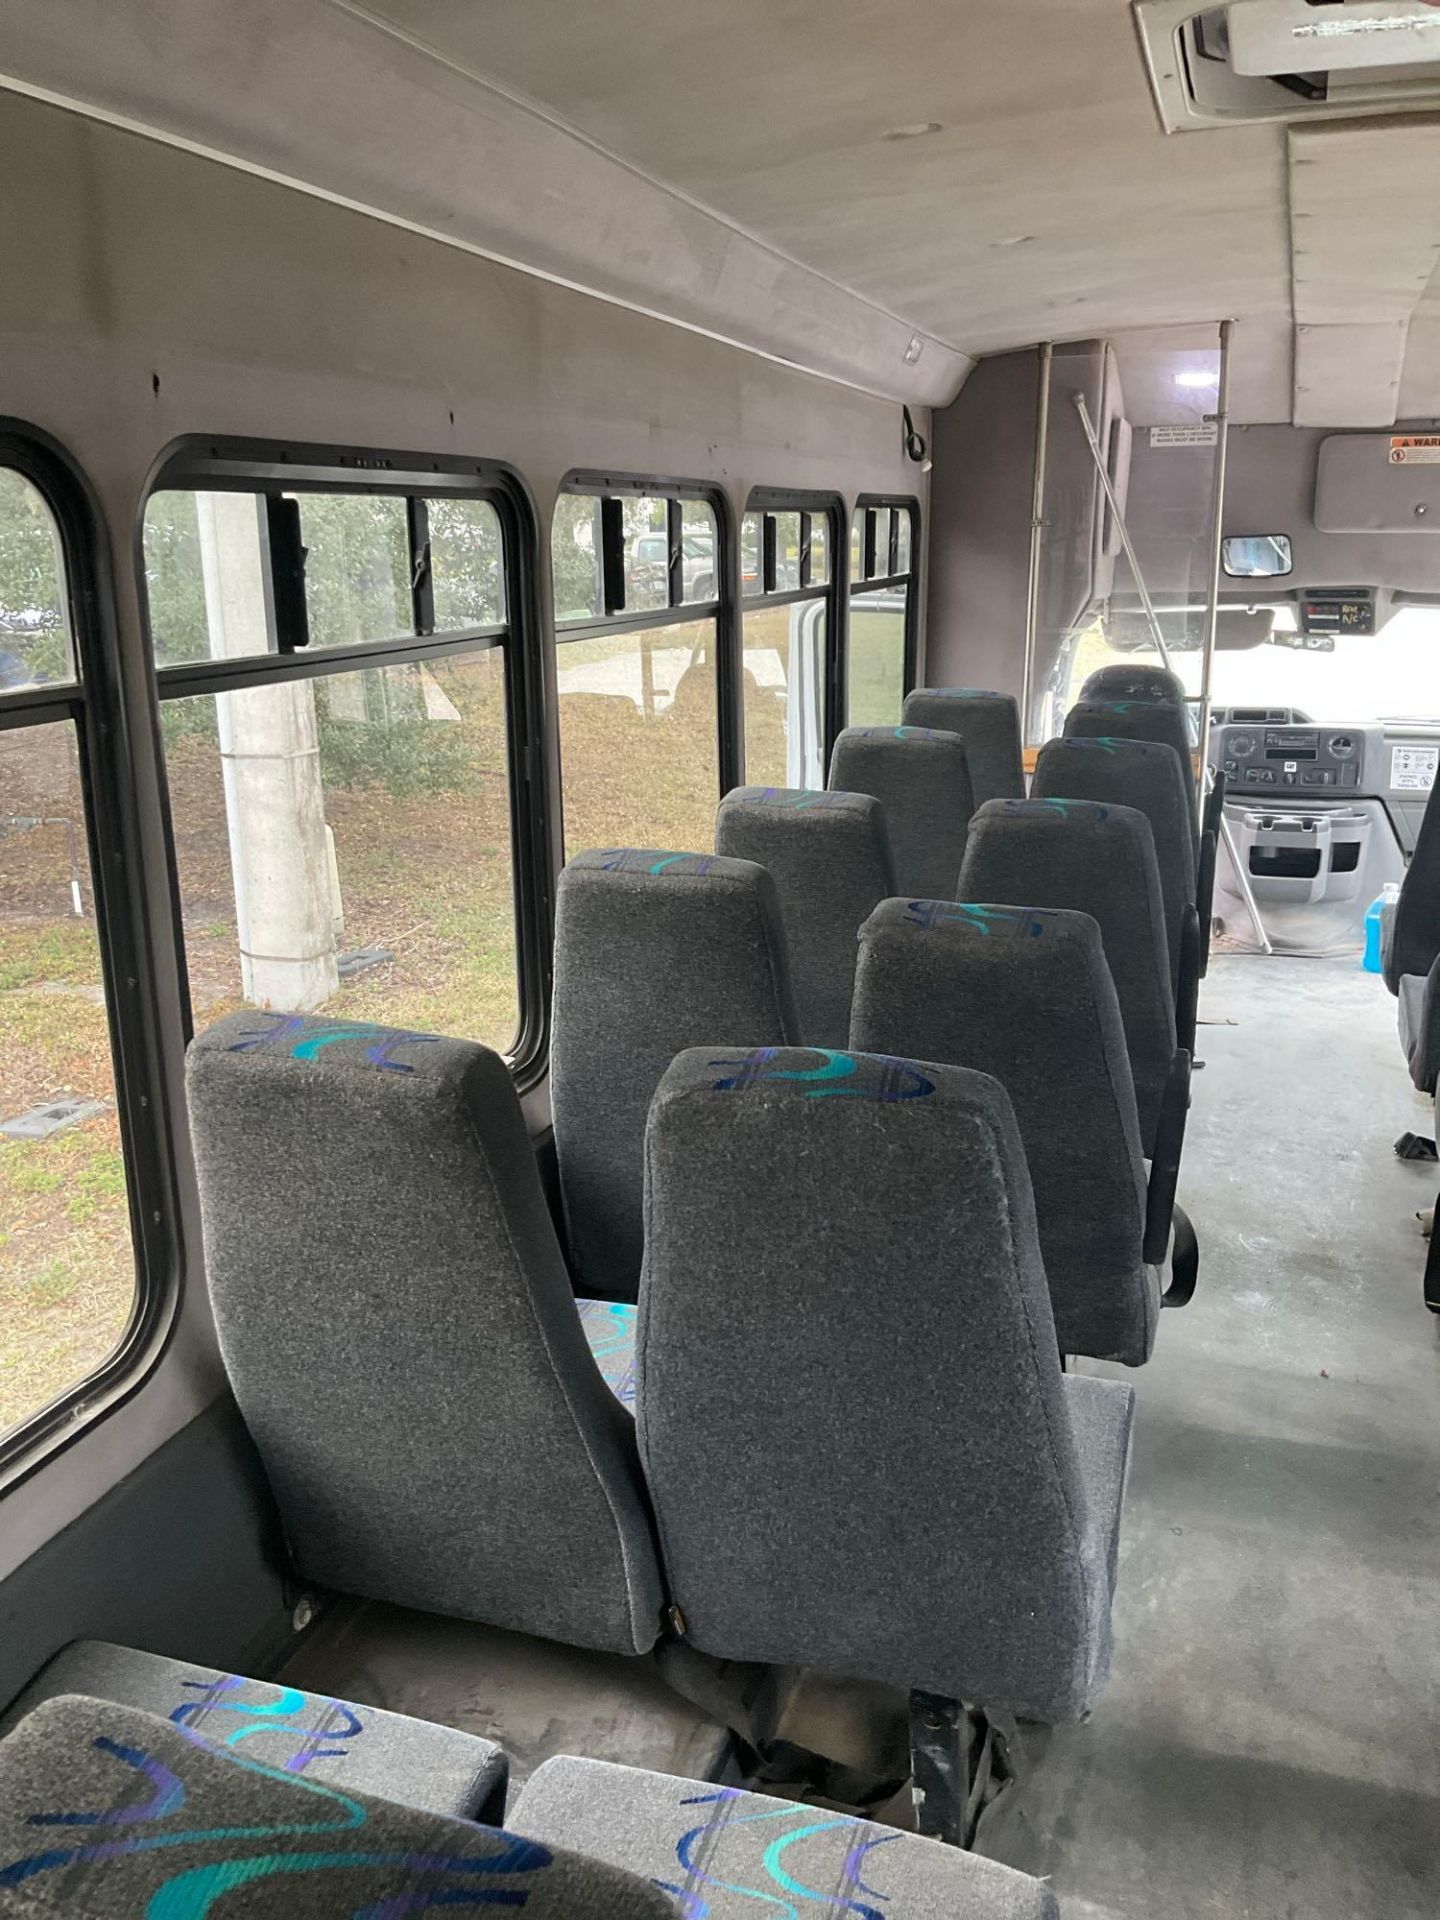 2018 FORD ECONOLINE 450 SHUTTLE BUS, GAS AUTOMATIC, 28 PASSENGER SEATING, APPROX 14500 GVWR, - Image 26 of 31